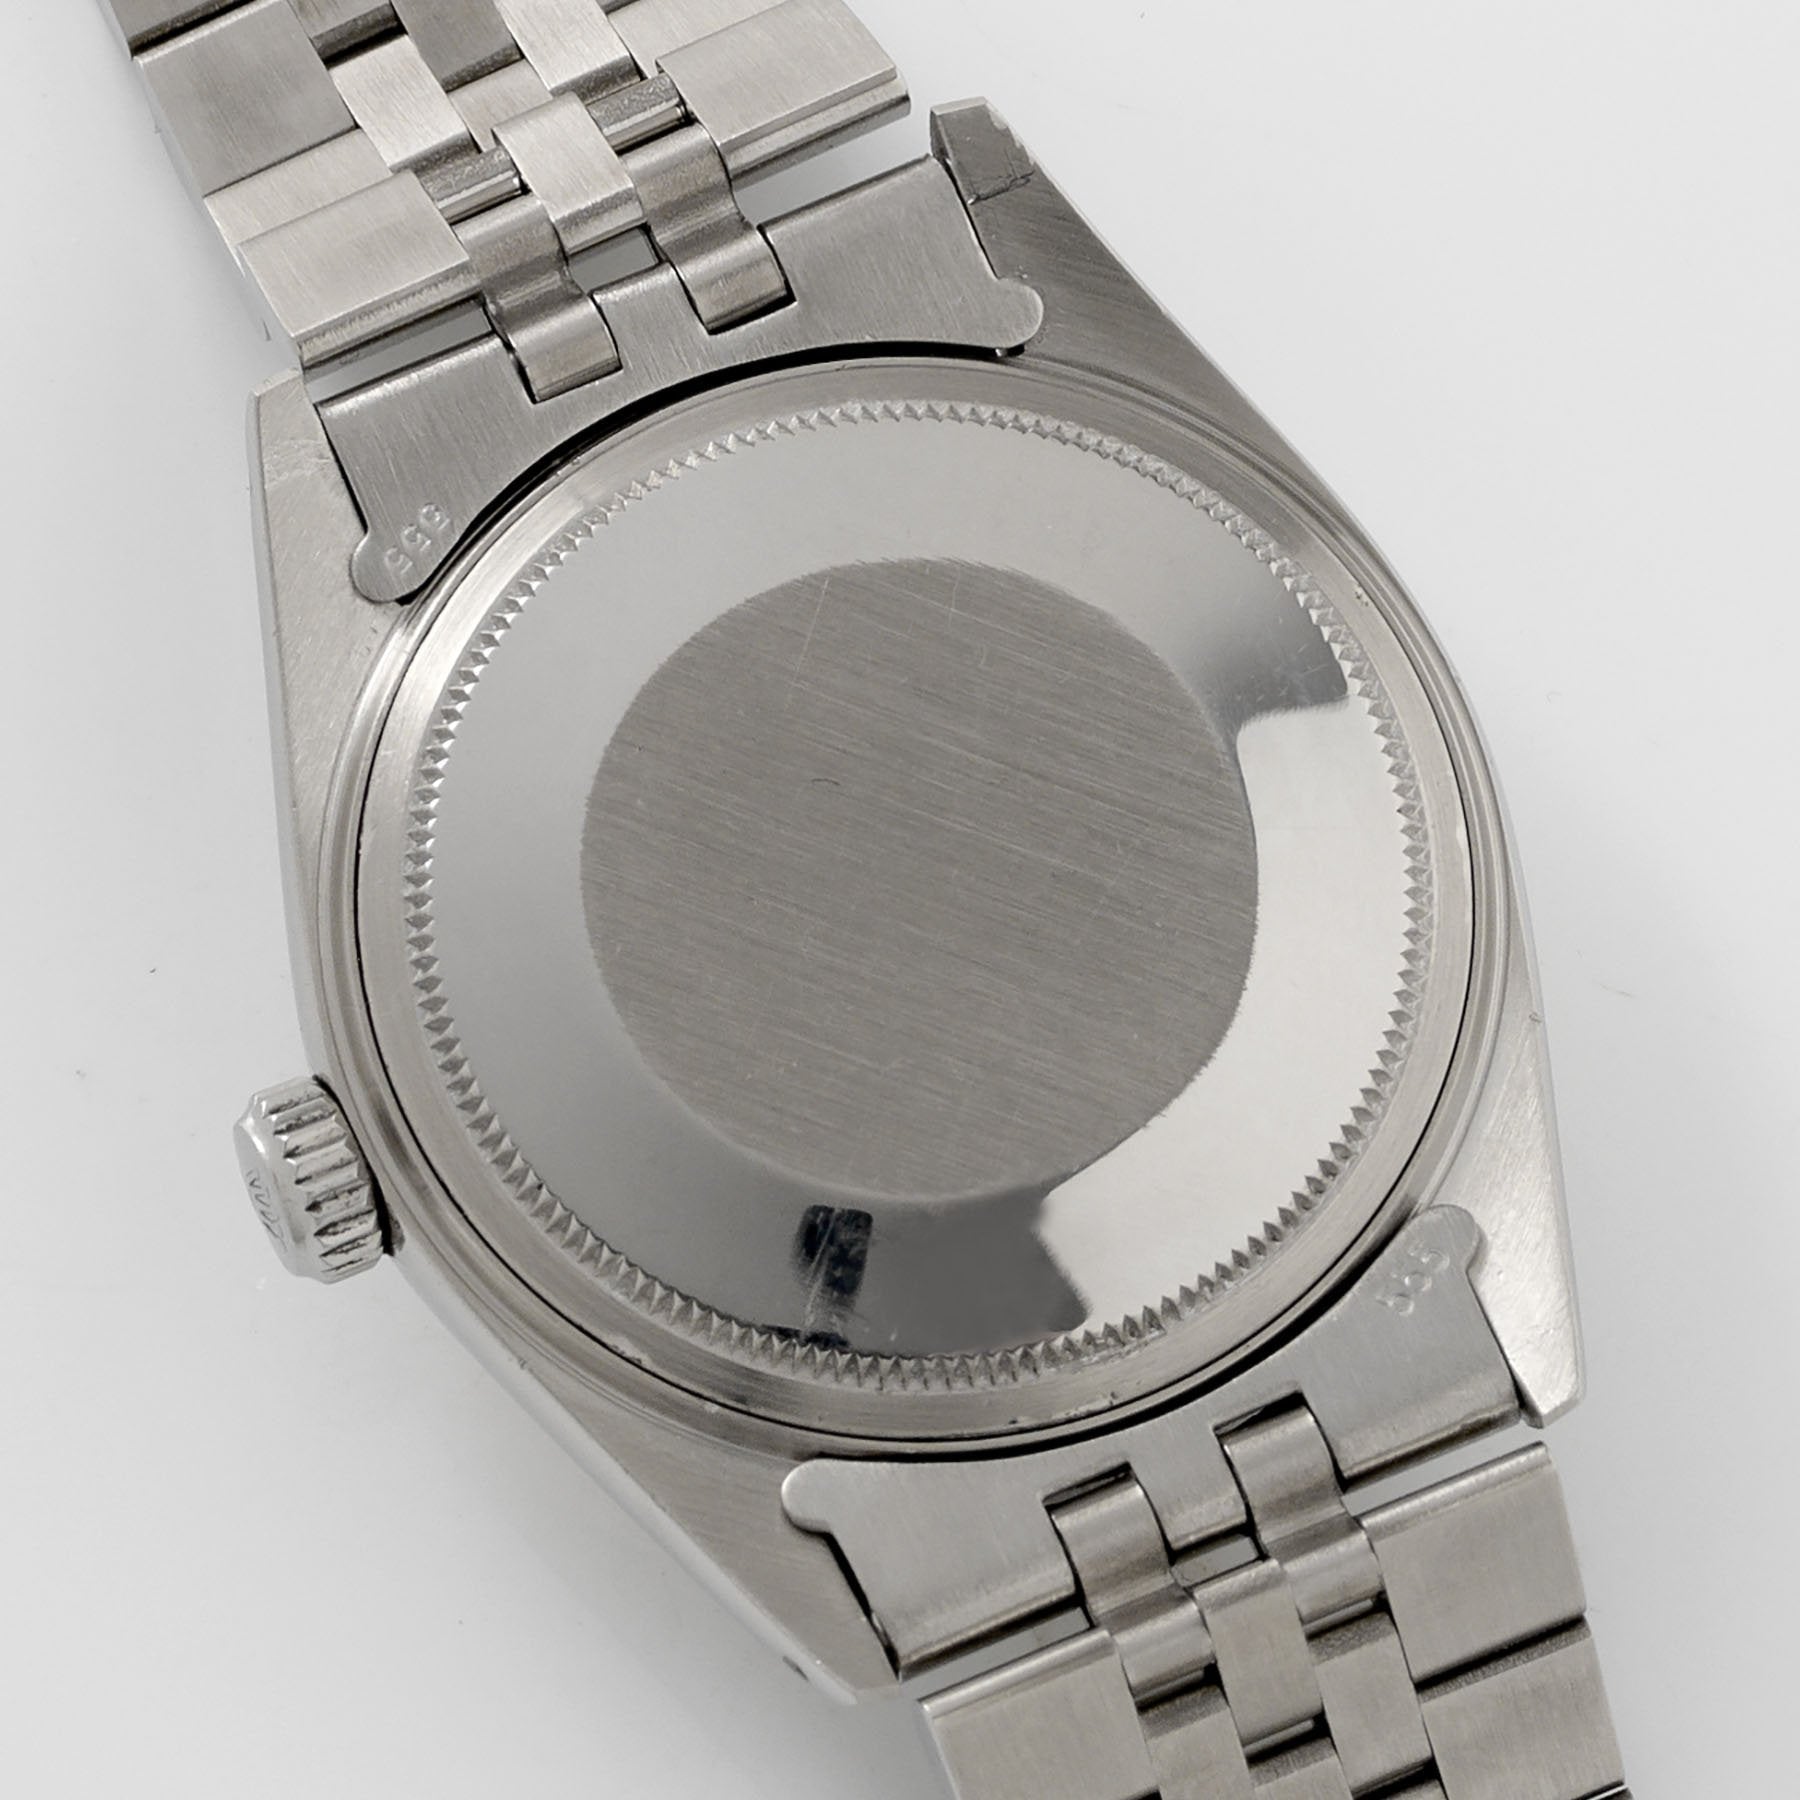 Rolex Datejust Reference 16014 Silver Dial Punched Papers